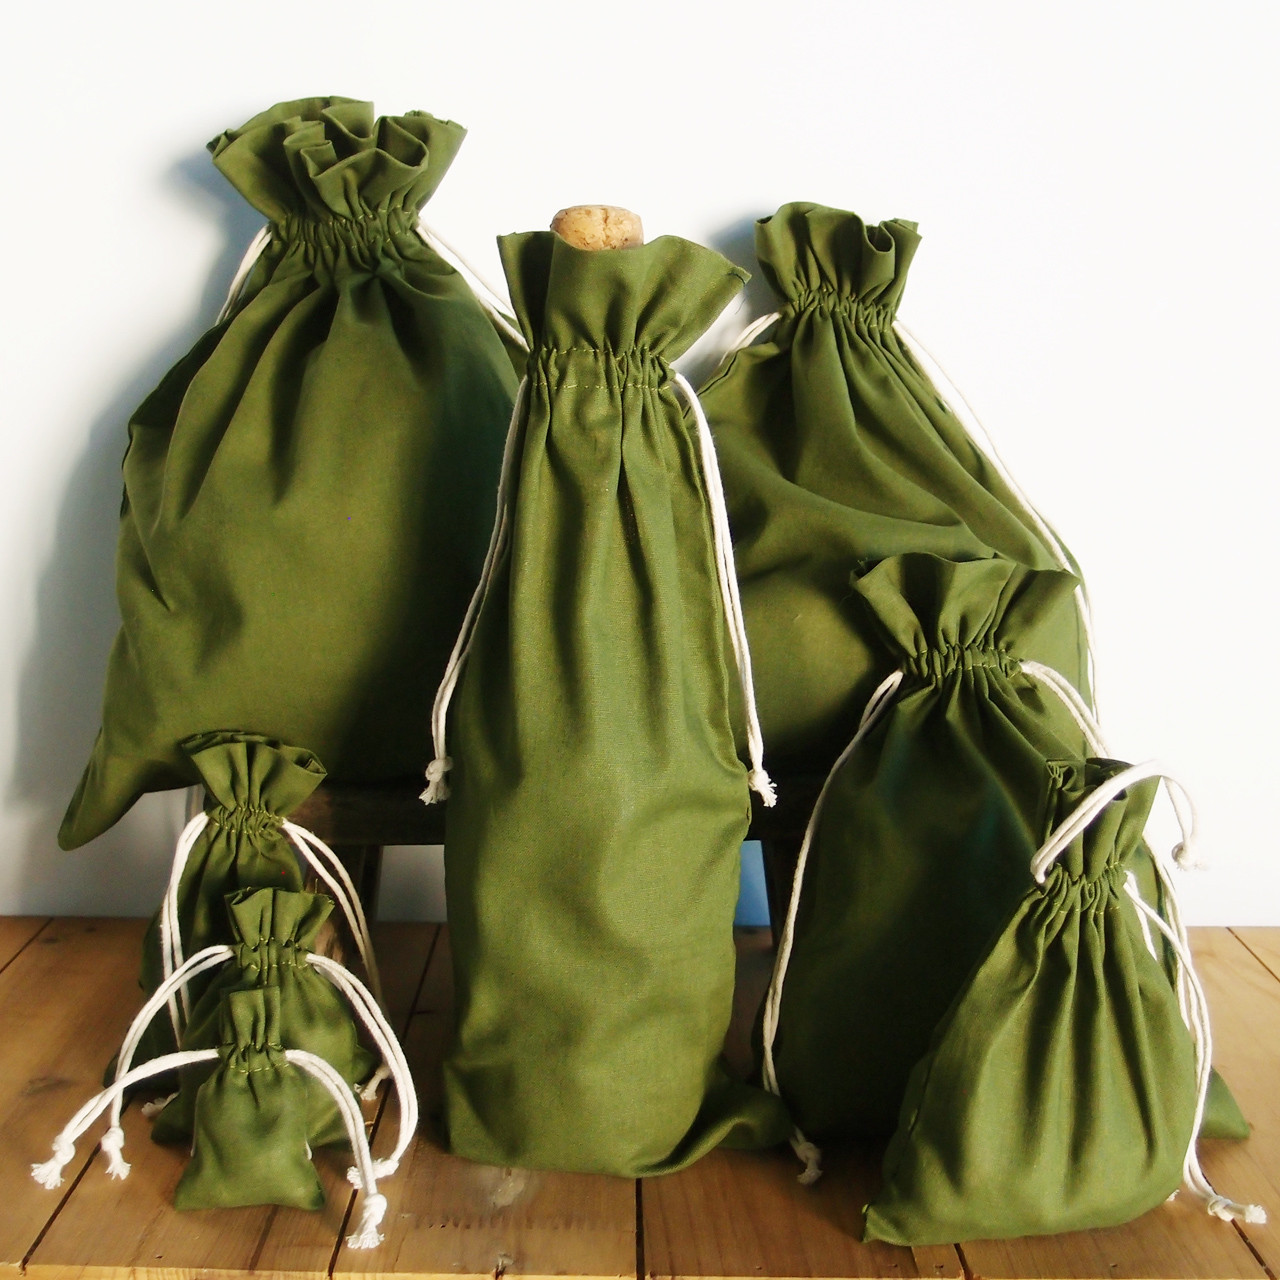 Wholesale olive green cotton drawstring bags at Packaging Decor. Excellent as wine bags, party favor bags, gift packaging, wedding favor bags, jewelry product packaging, and more.